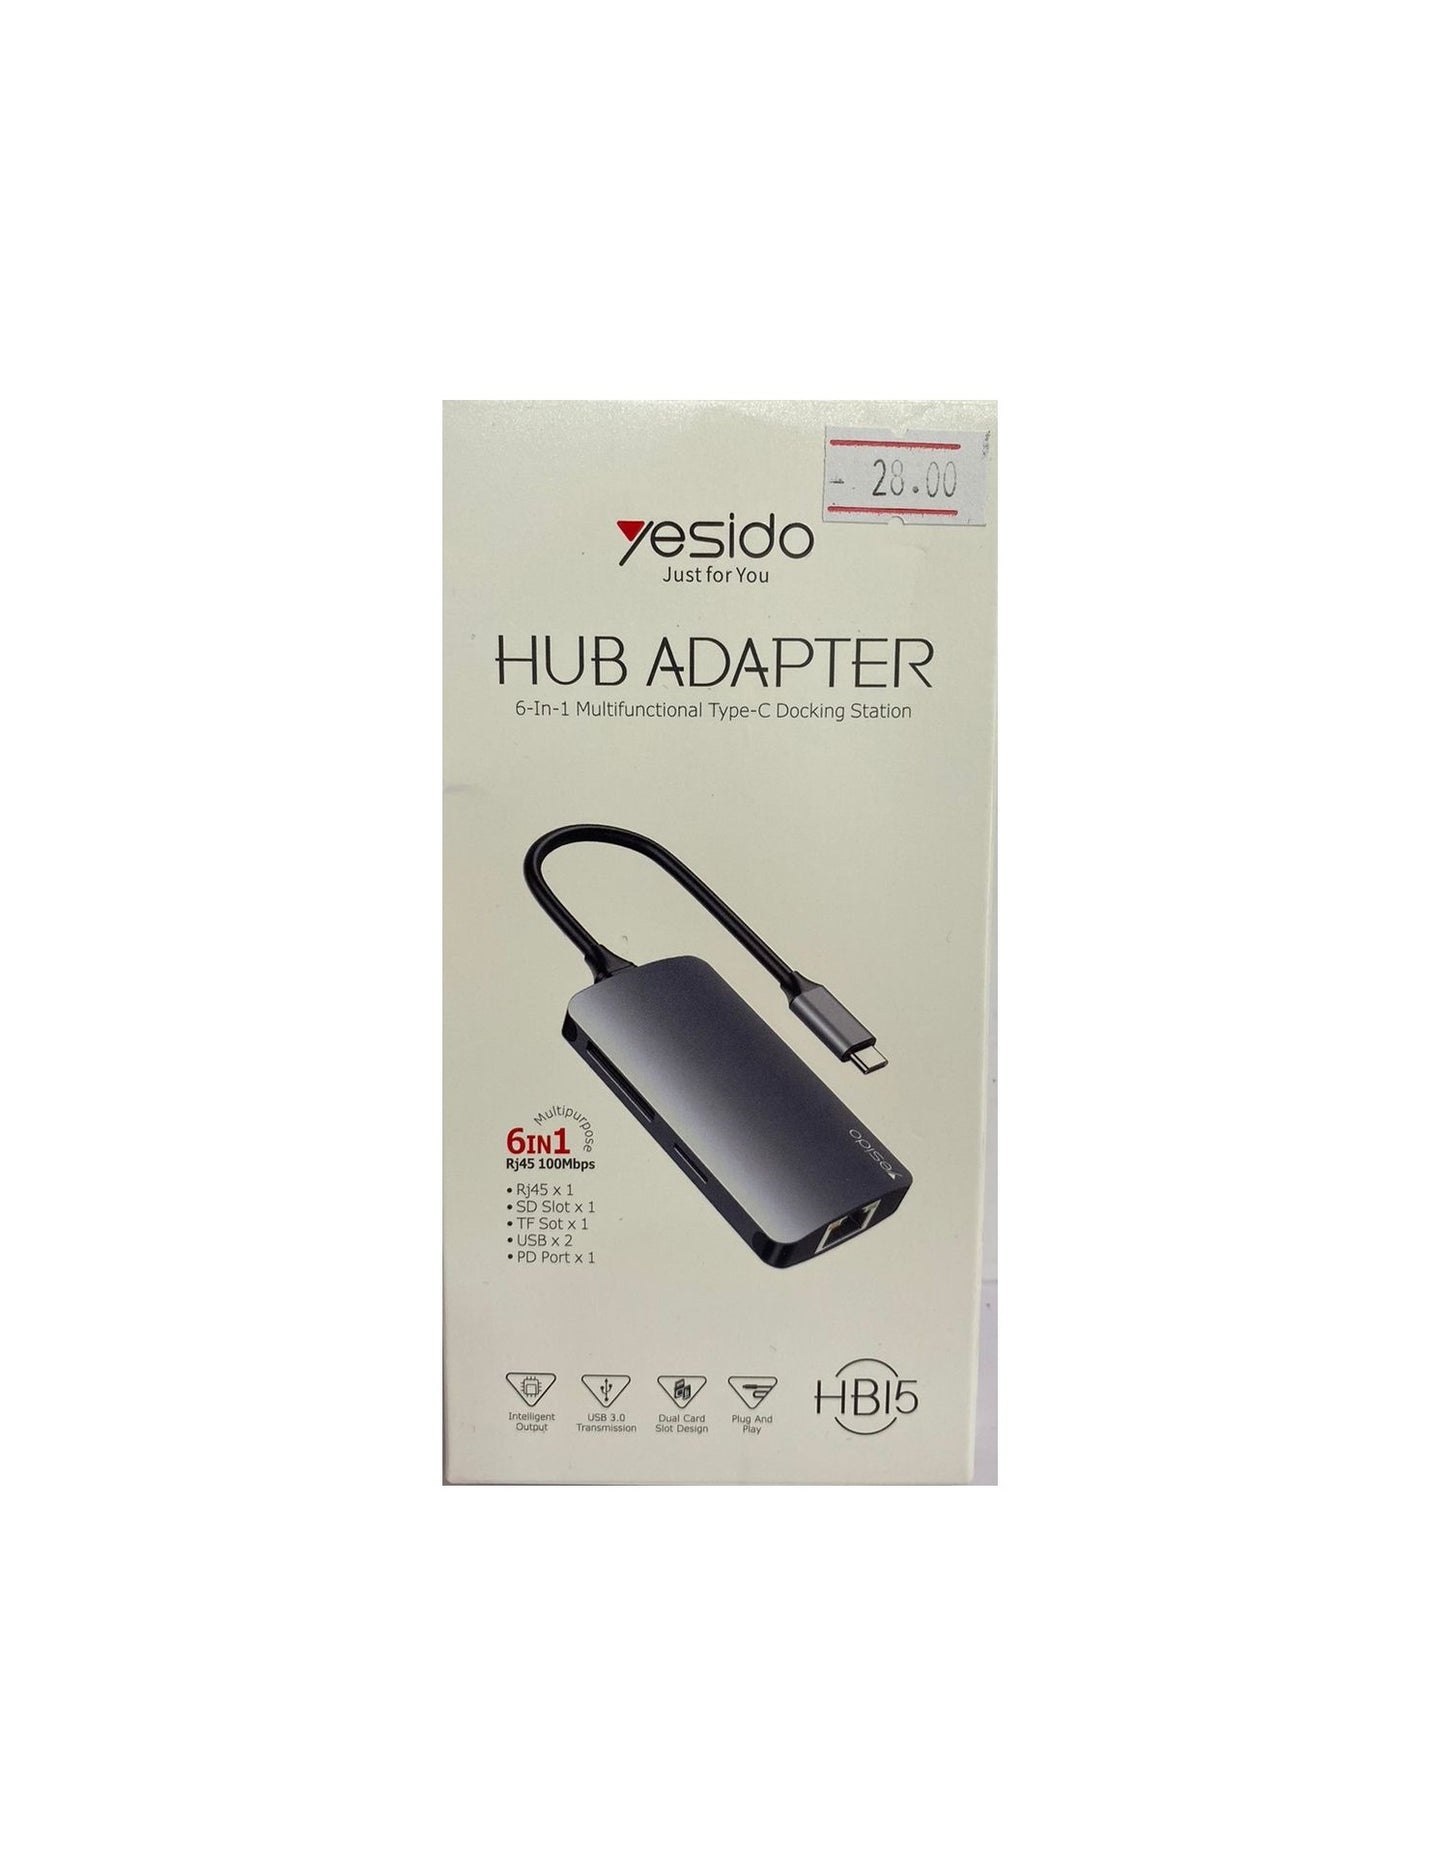 Yesido Hub Adapter 6 in 1 Type-C Adapter (Eathernet-SD Slot-TF Sot-Dual USB-PD Port) for Gaming HB15